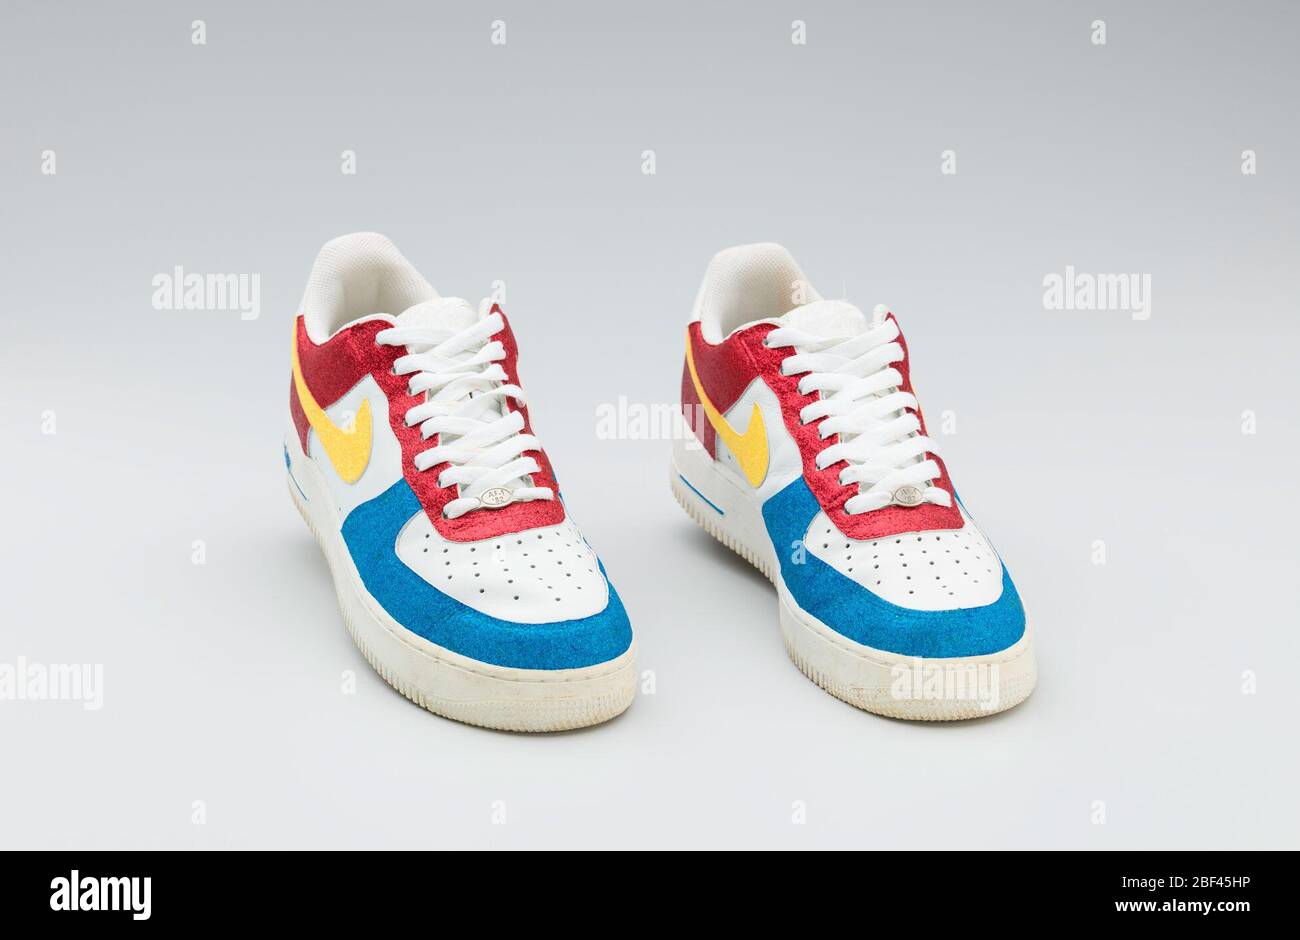 Red white yellow and blue Nike sneakers worn by Big Boi of Outkast. A pair  of white Nike sneakers with glitter red, blue, and yellow sections worn by  Big Boi of Outkast.